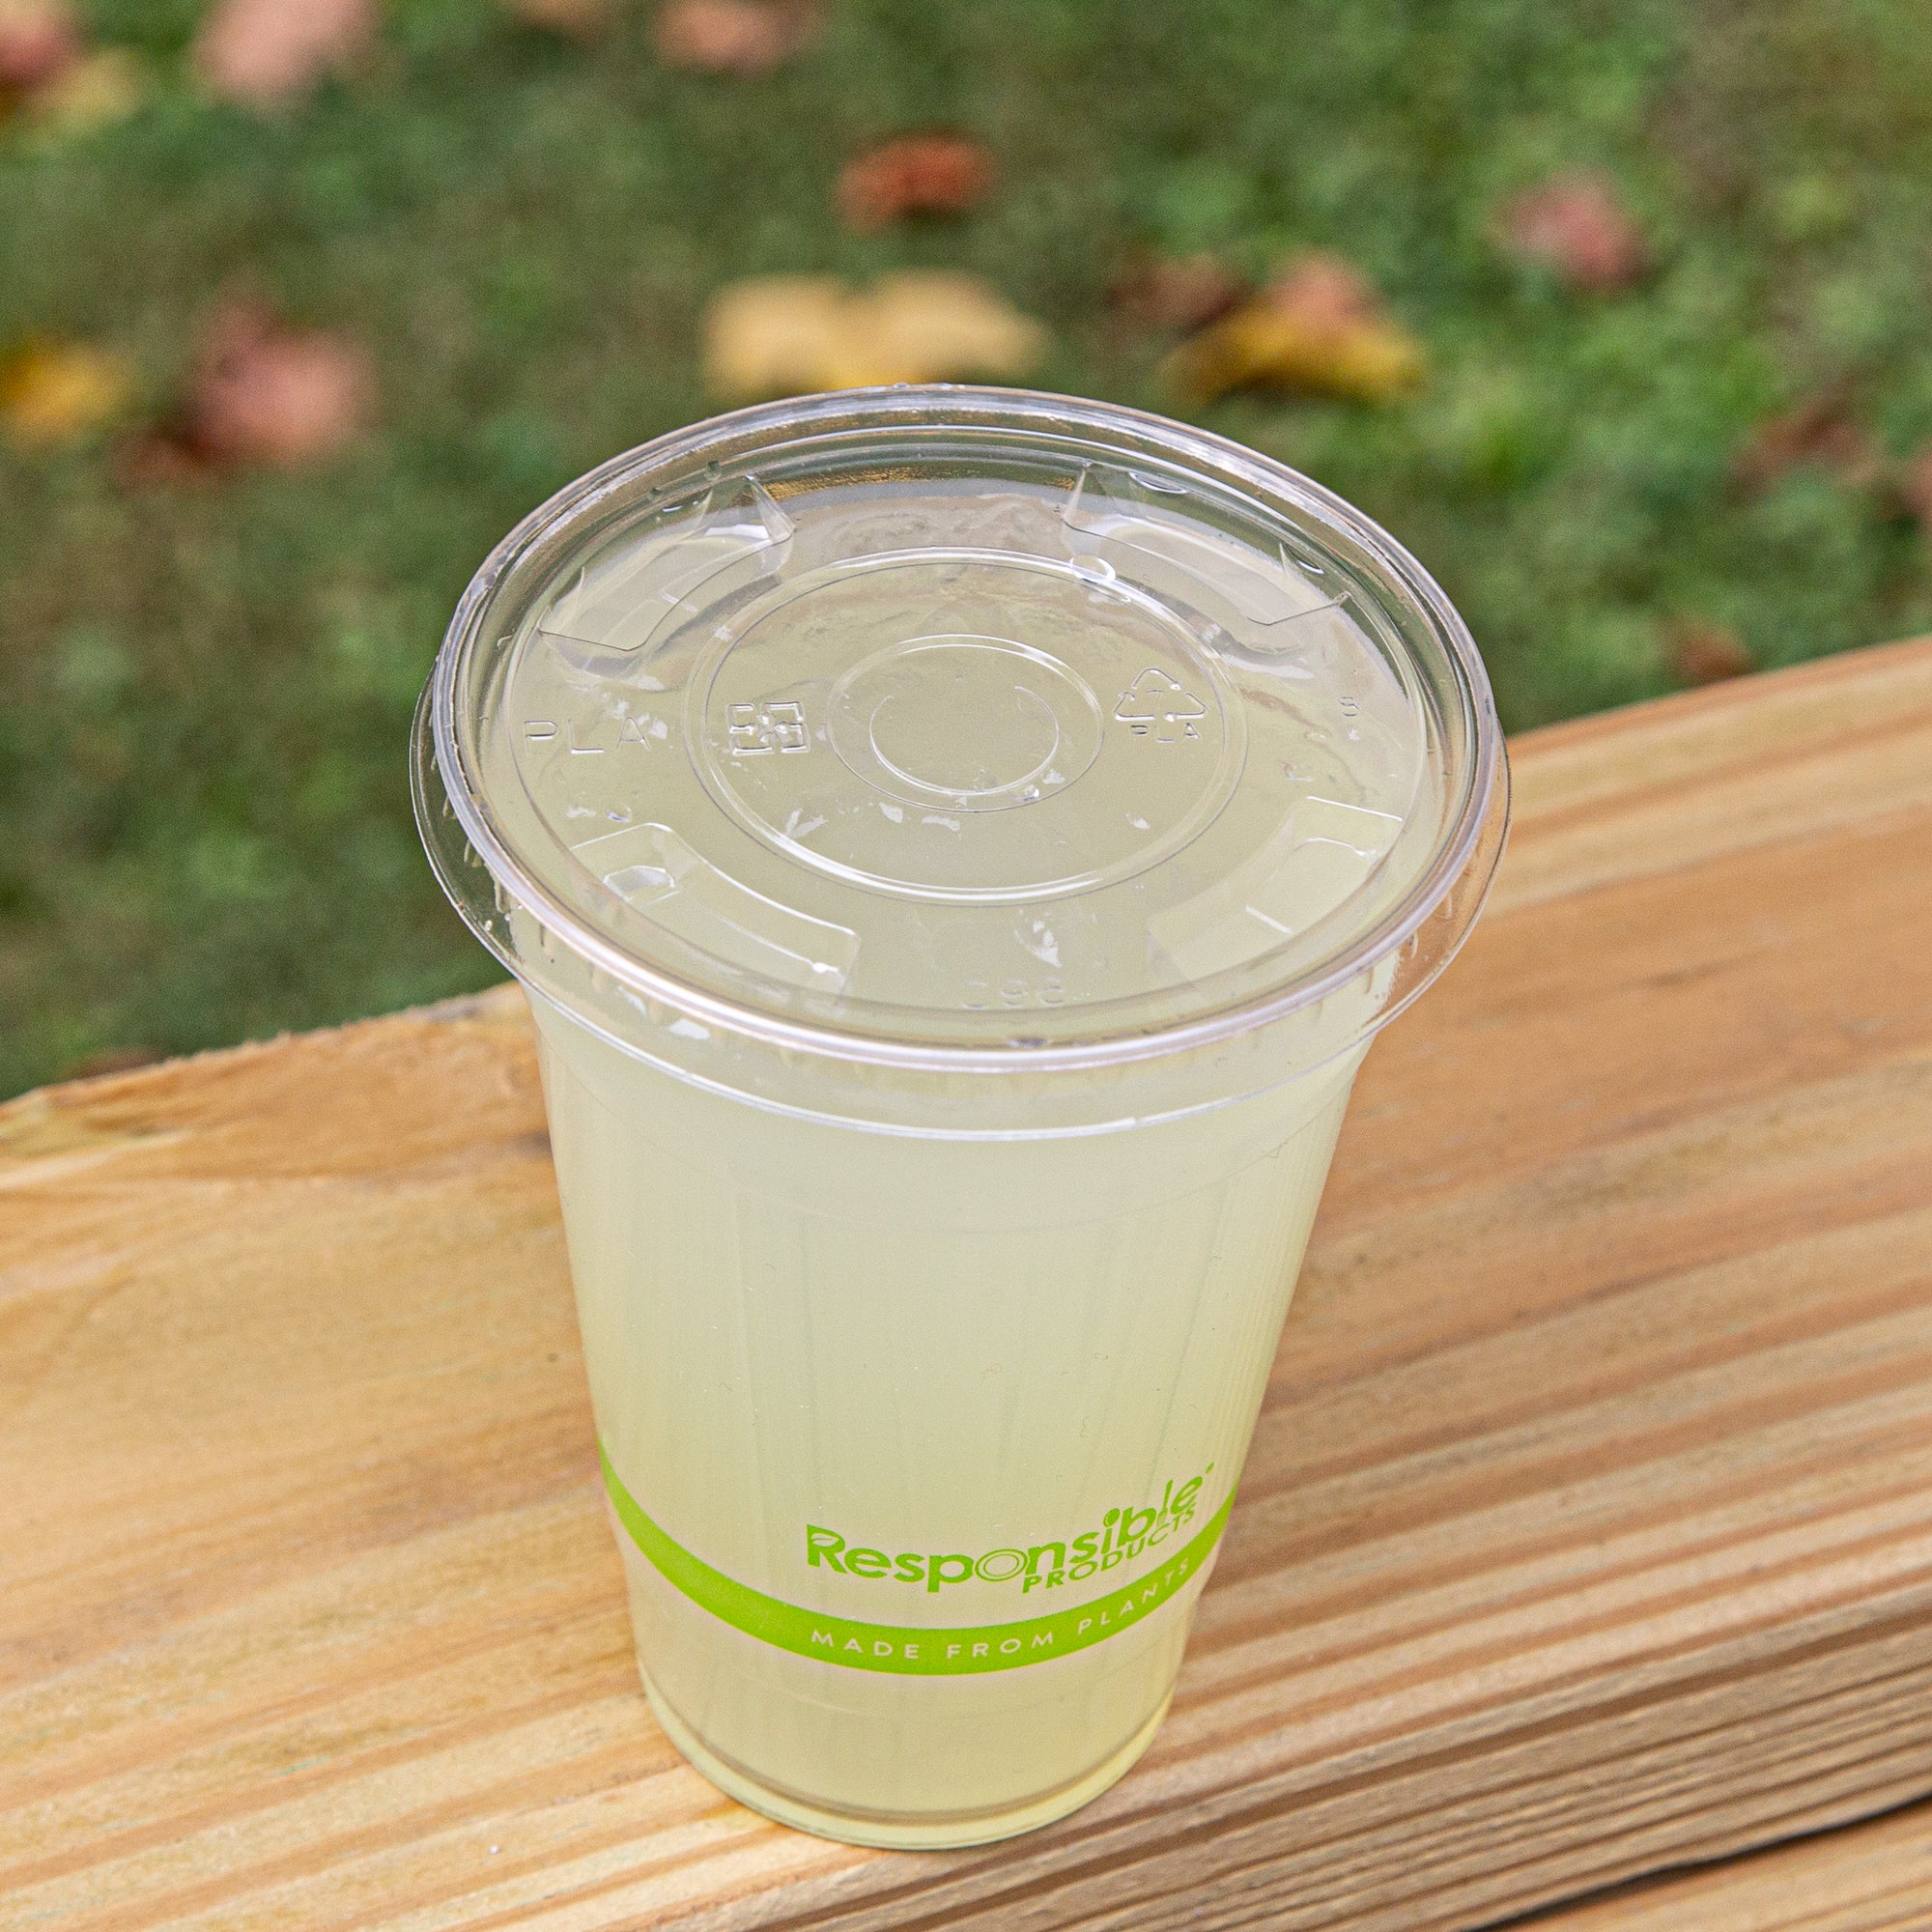 Eco-Friendly Compostable Clear Cup Sip Lid - Responsible Products